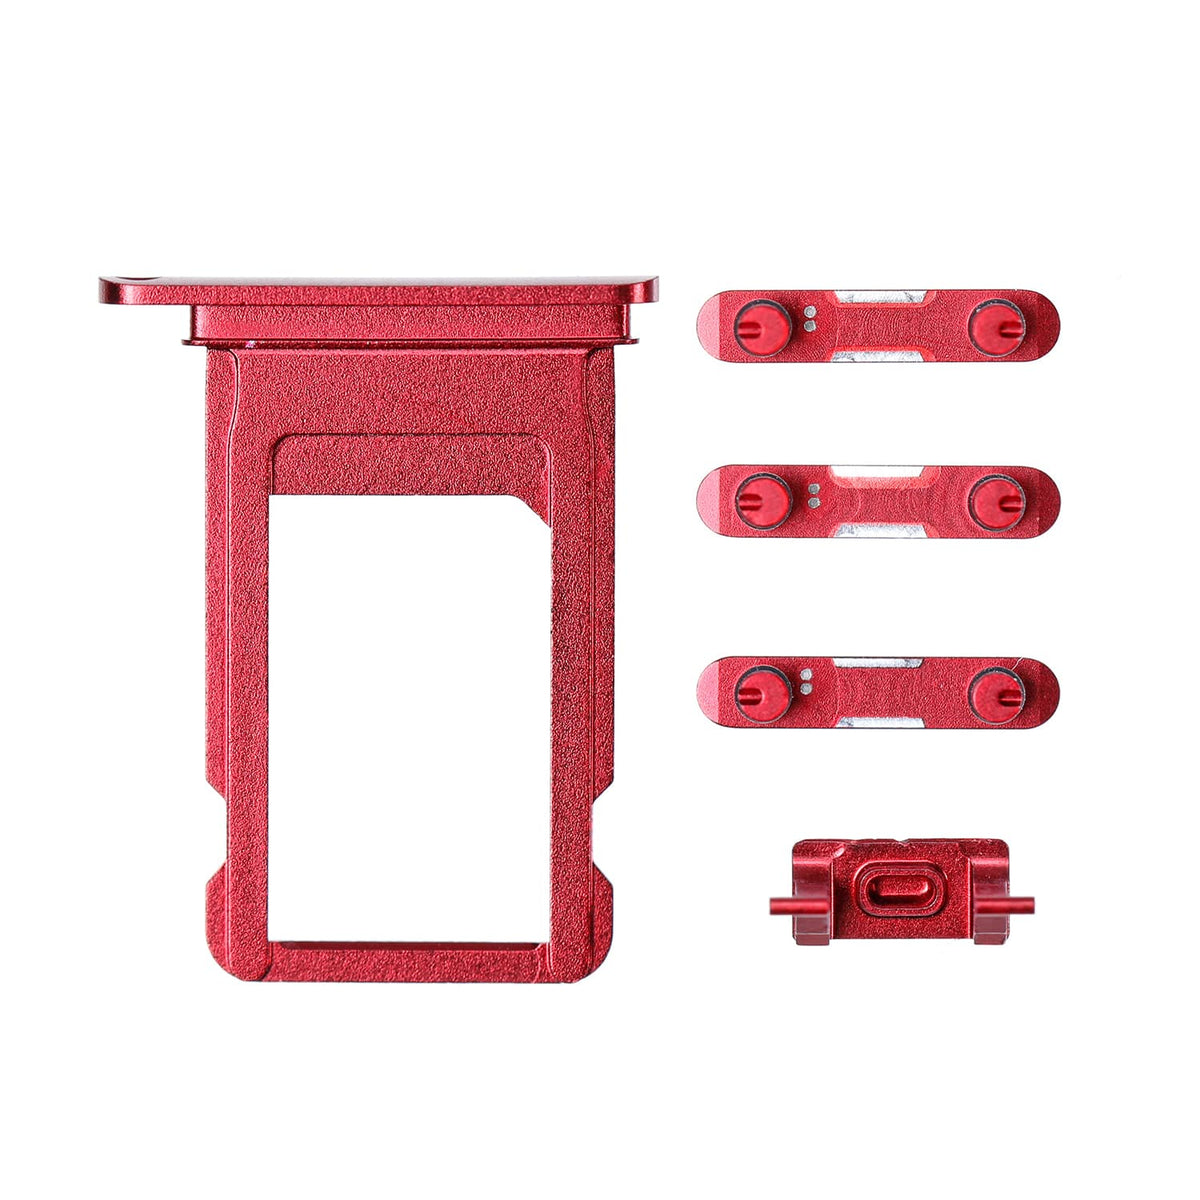 RED SIDE BUTTONS SET WITH SIM TRAY FOR IPHONE 8 PLUS